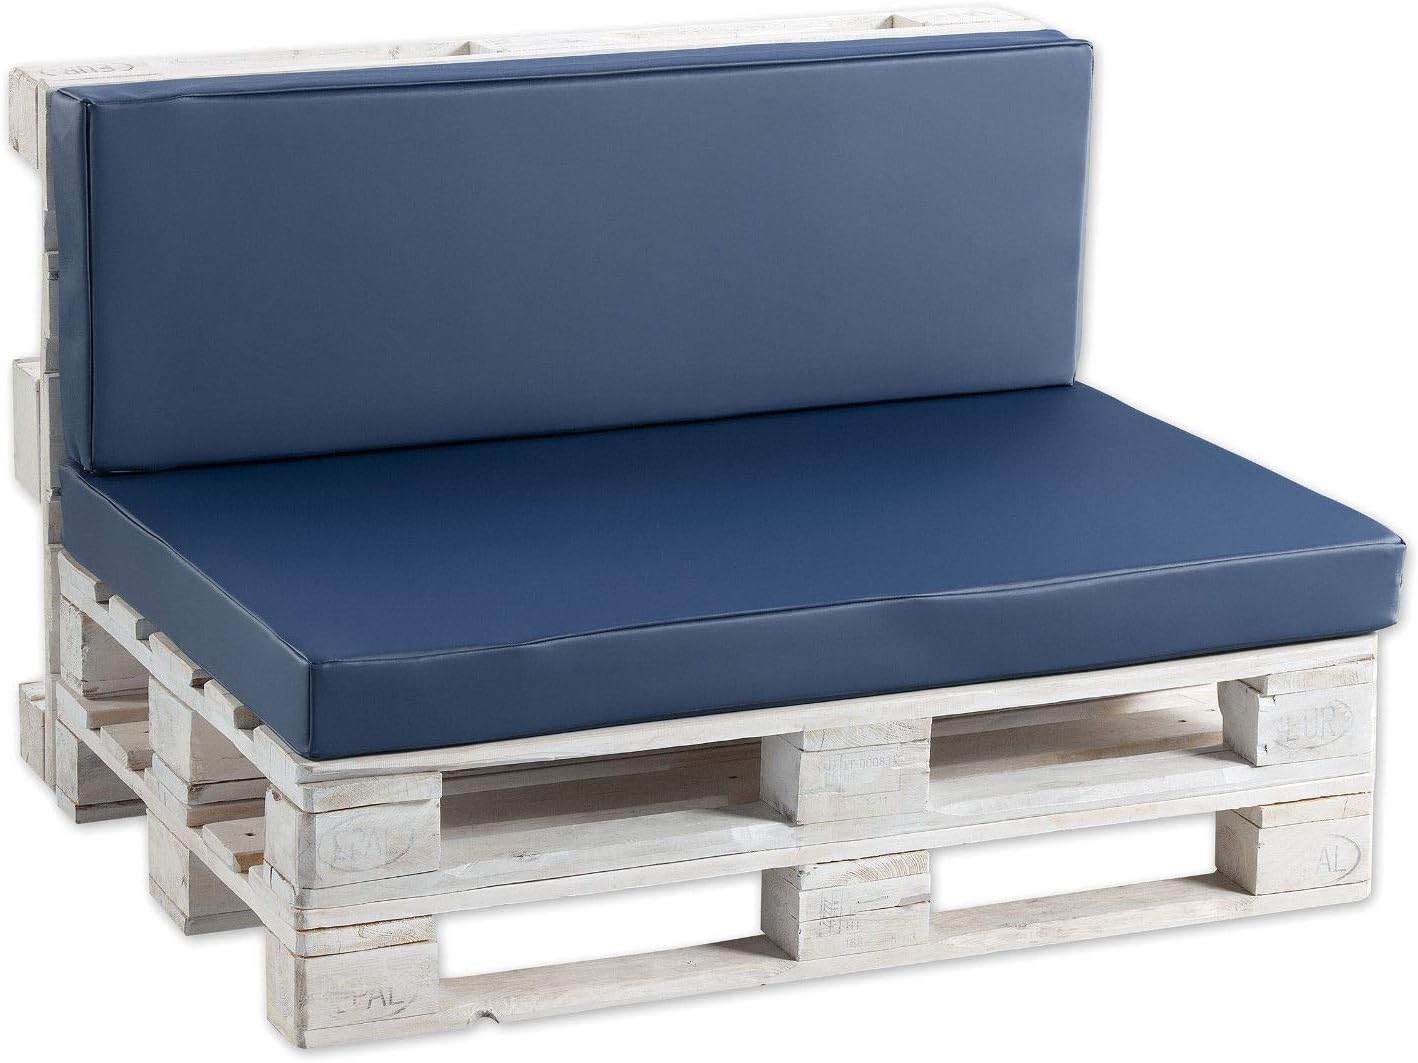 Pallet Cushion Set (Seat Cushion + Backrest) / 120 x 80 cm and 120 x 40 cm / Faux Leather / Smooth